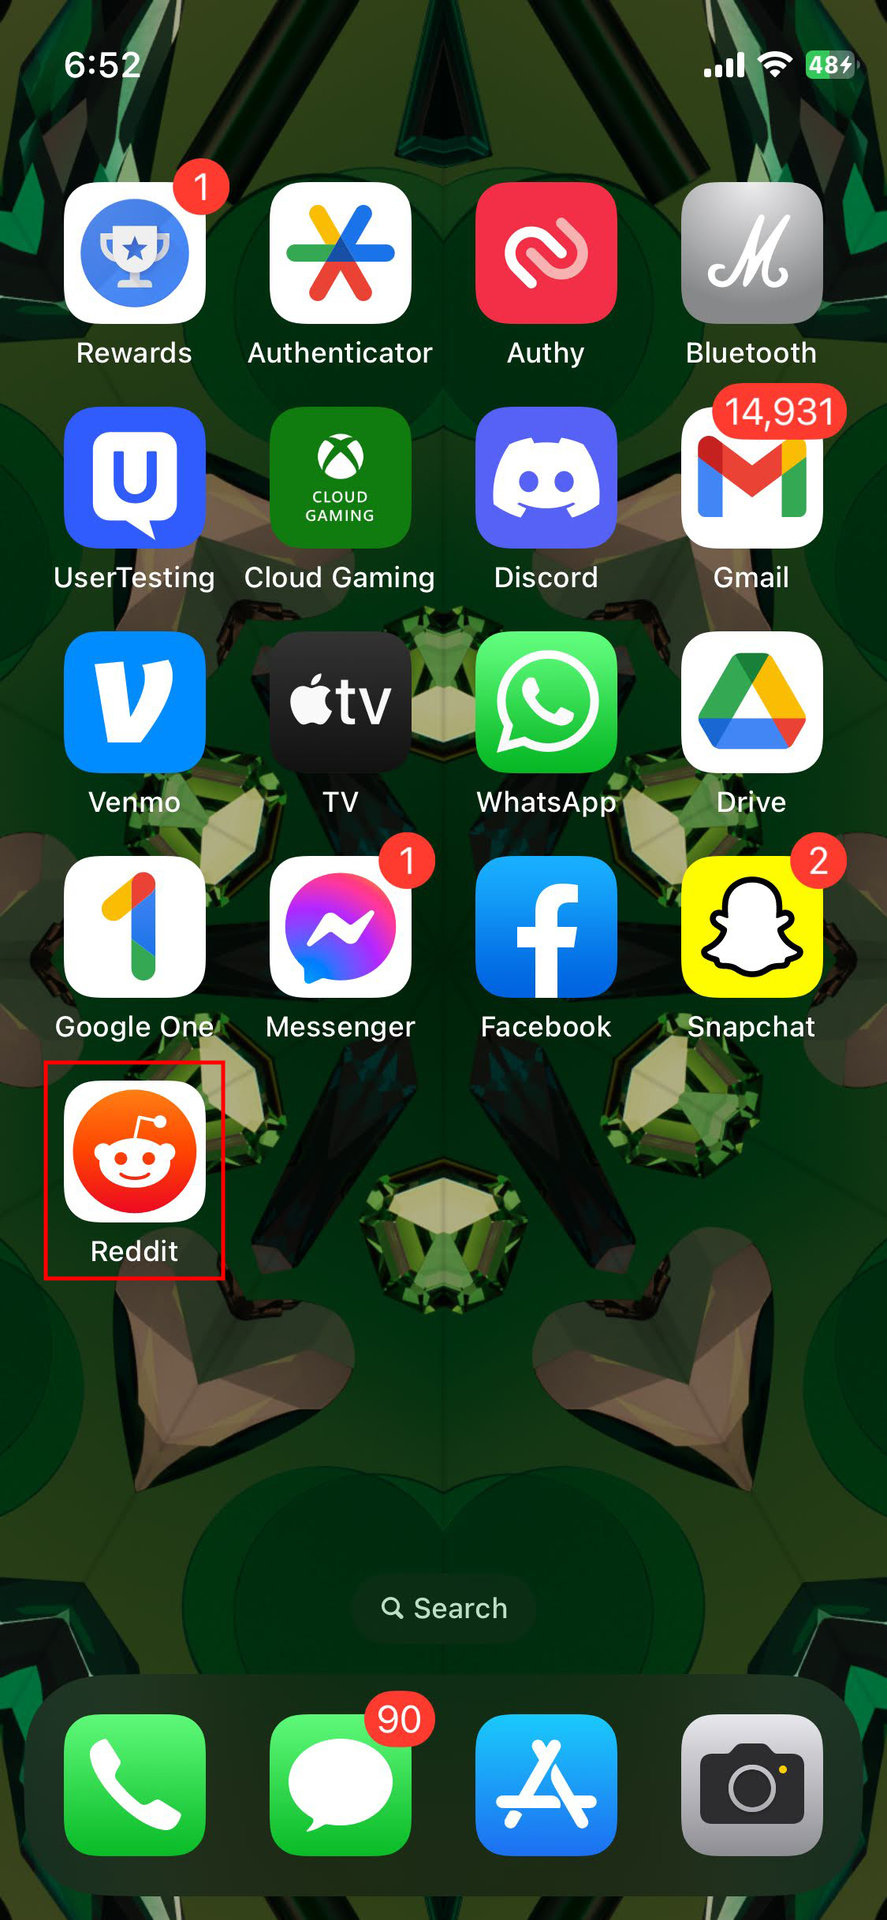 How to uninstall an iPhone app Reddit (1)